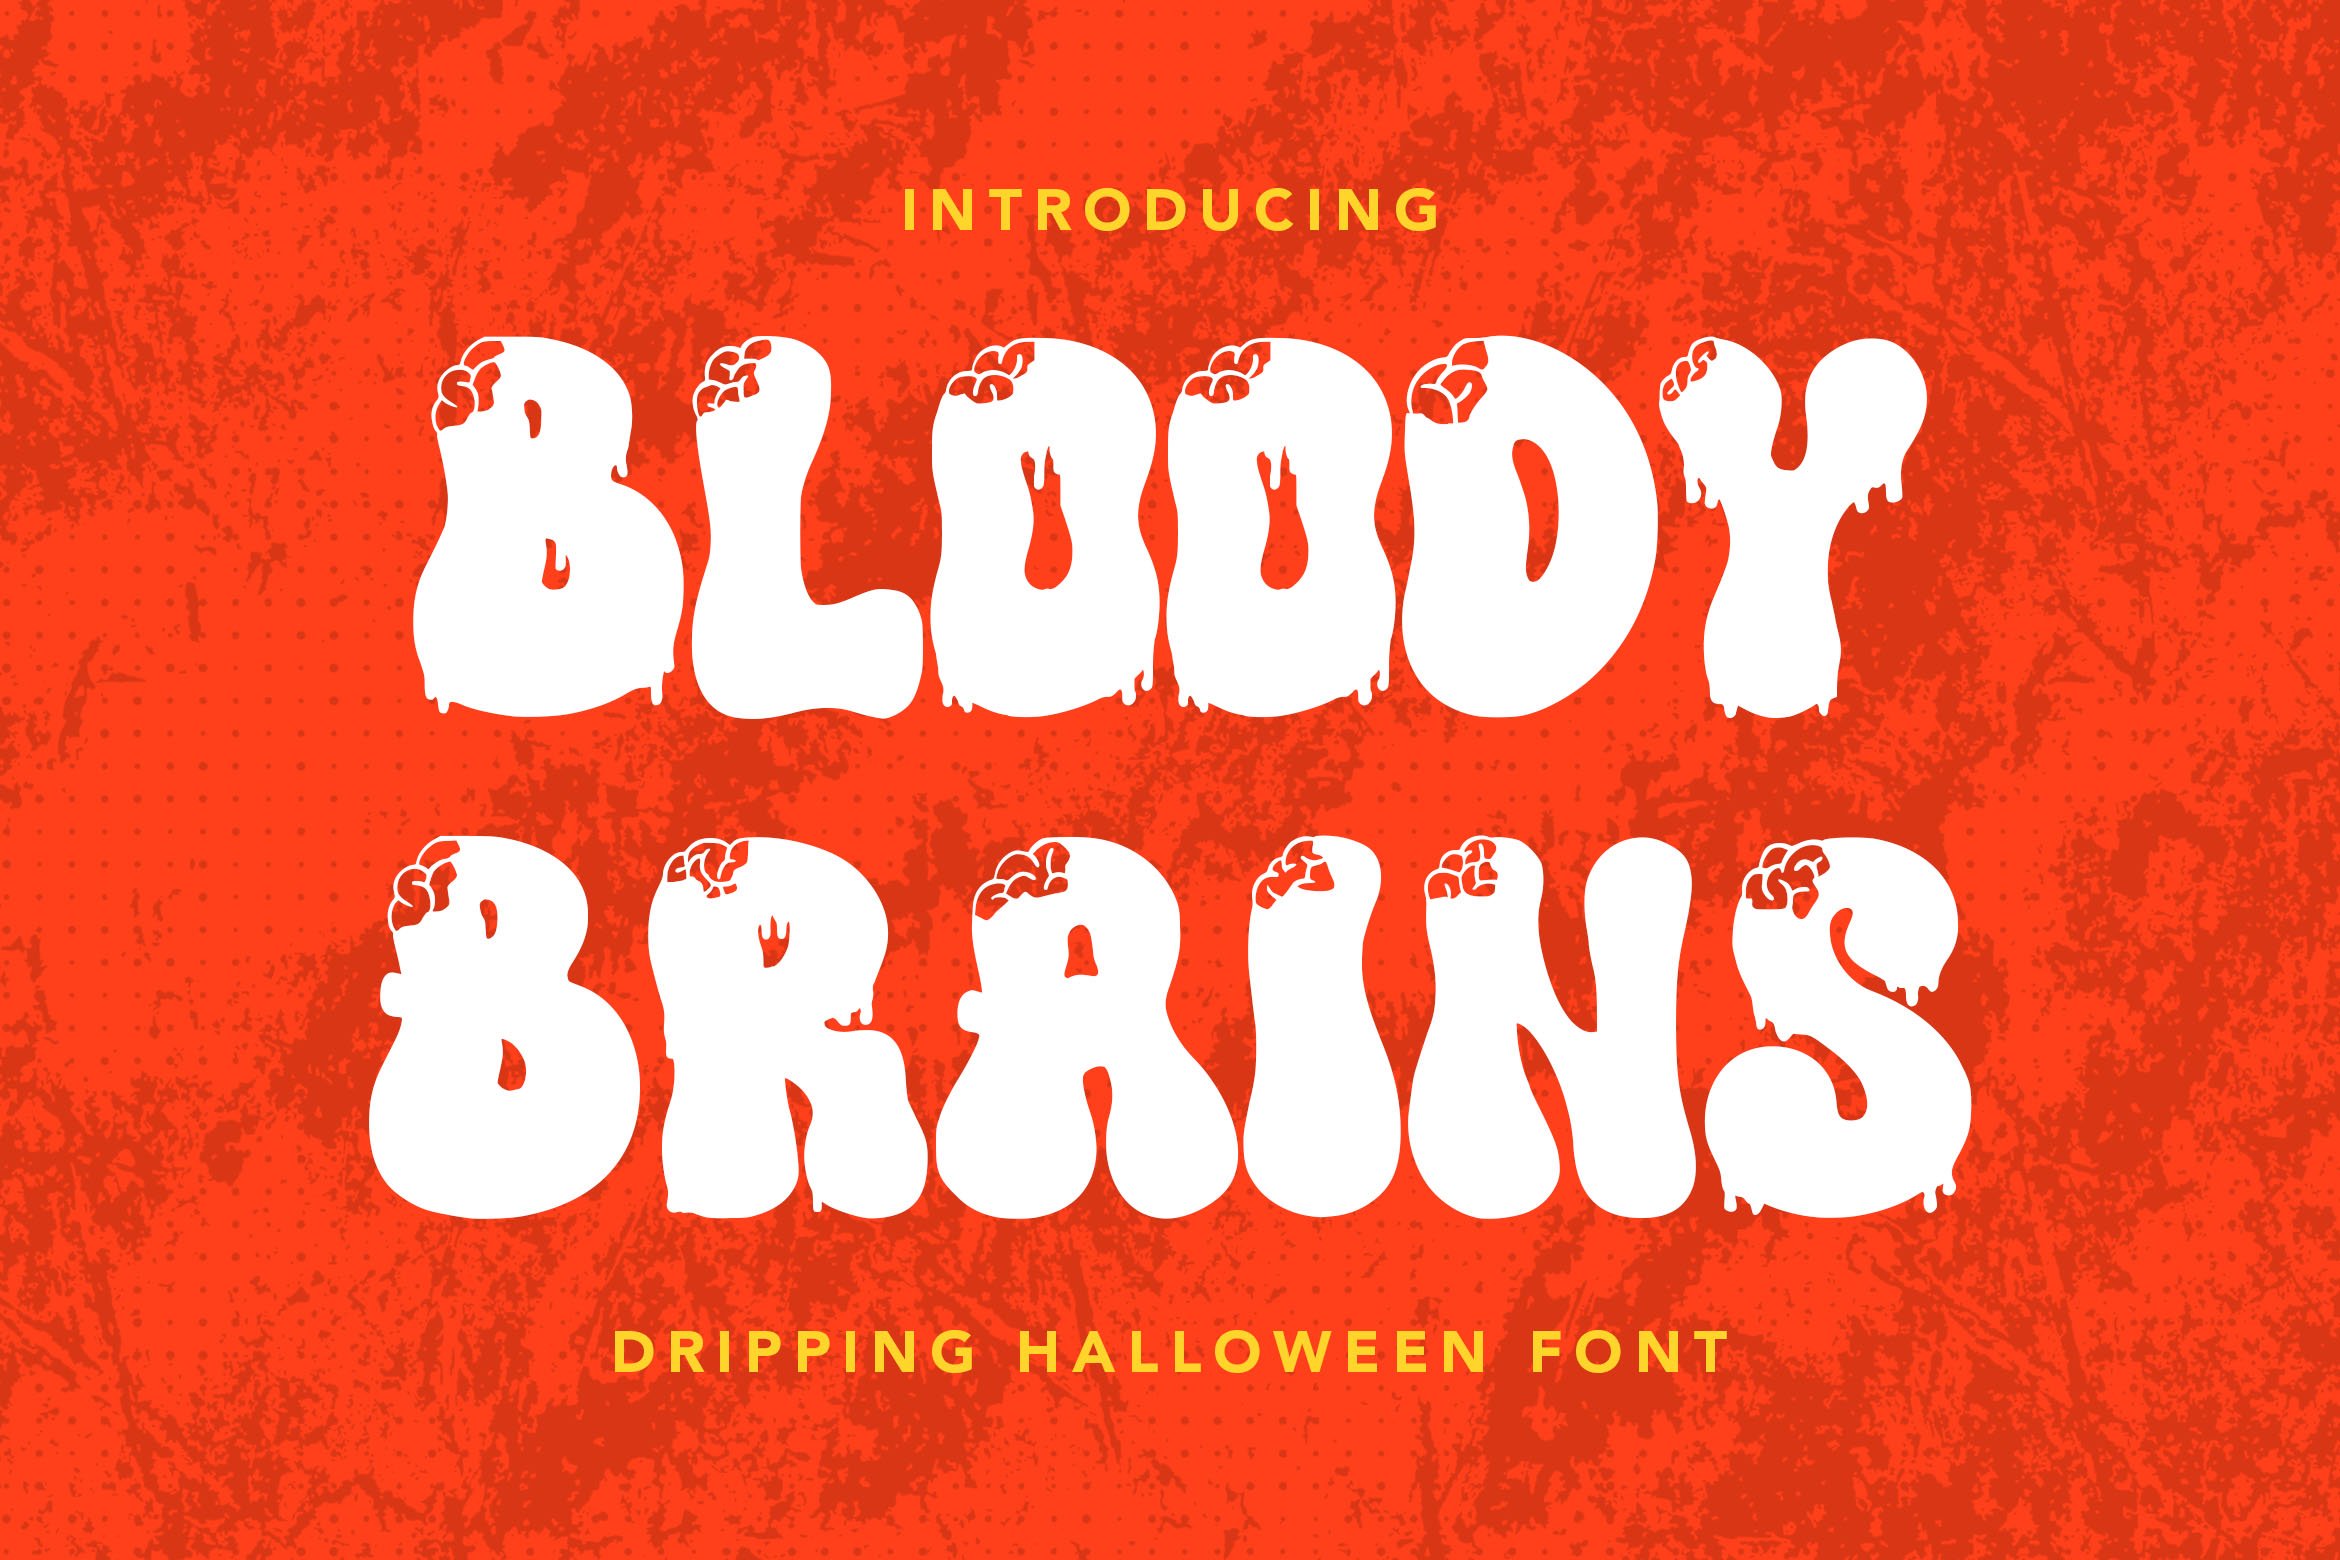 Bloody Brains - Halloween Font cover image.